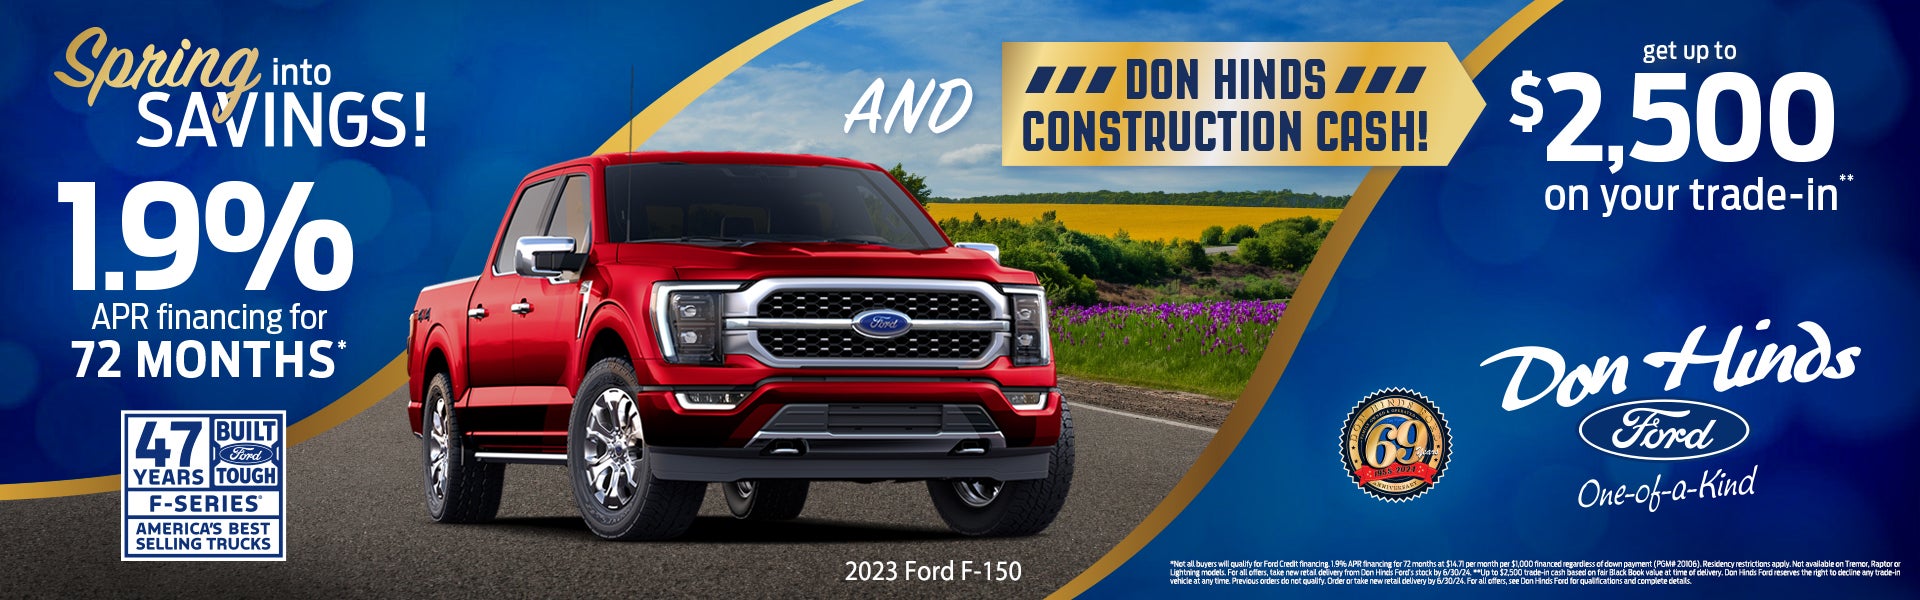 Don Hinds Ford Blue & Gold F150 ad banner